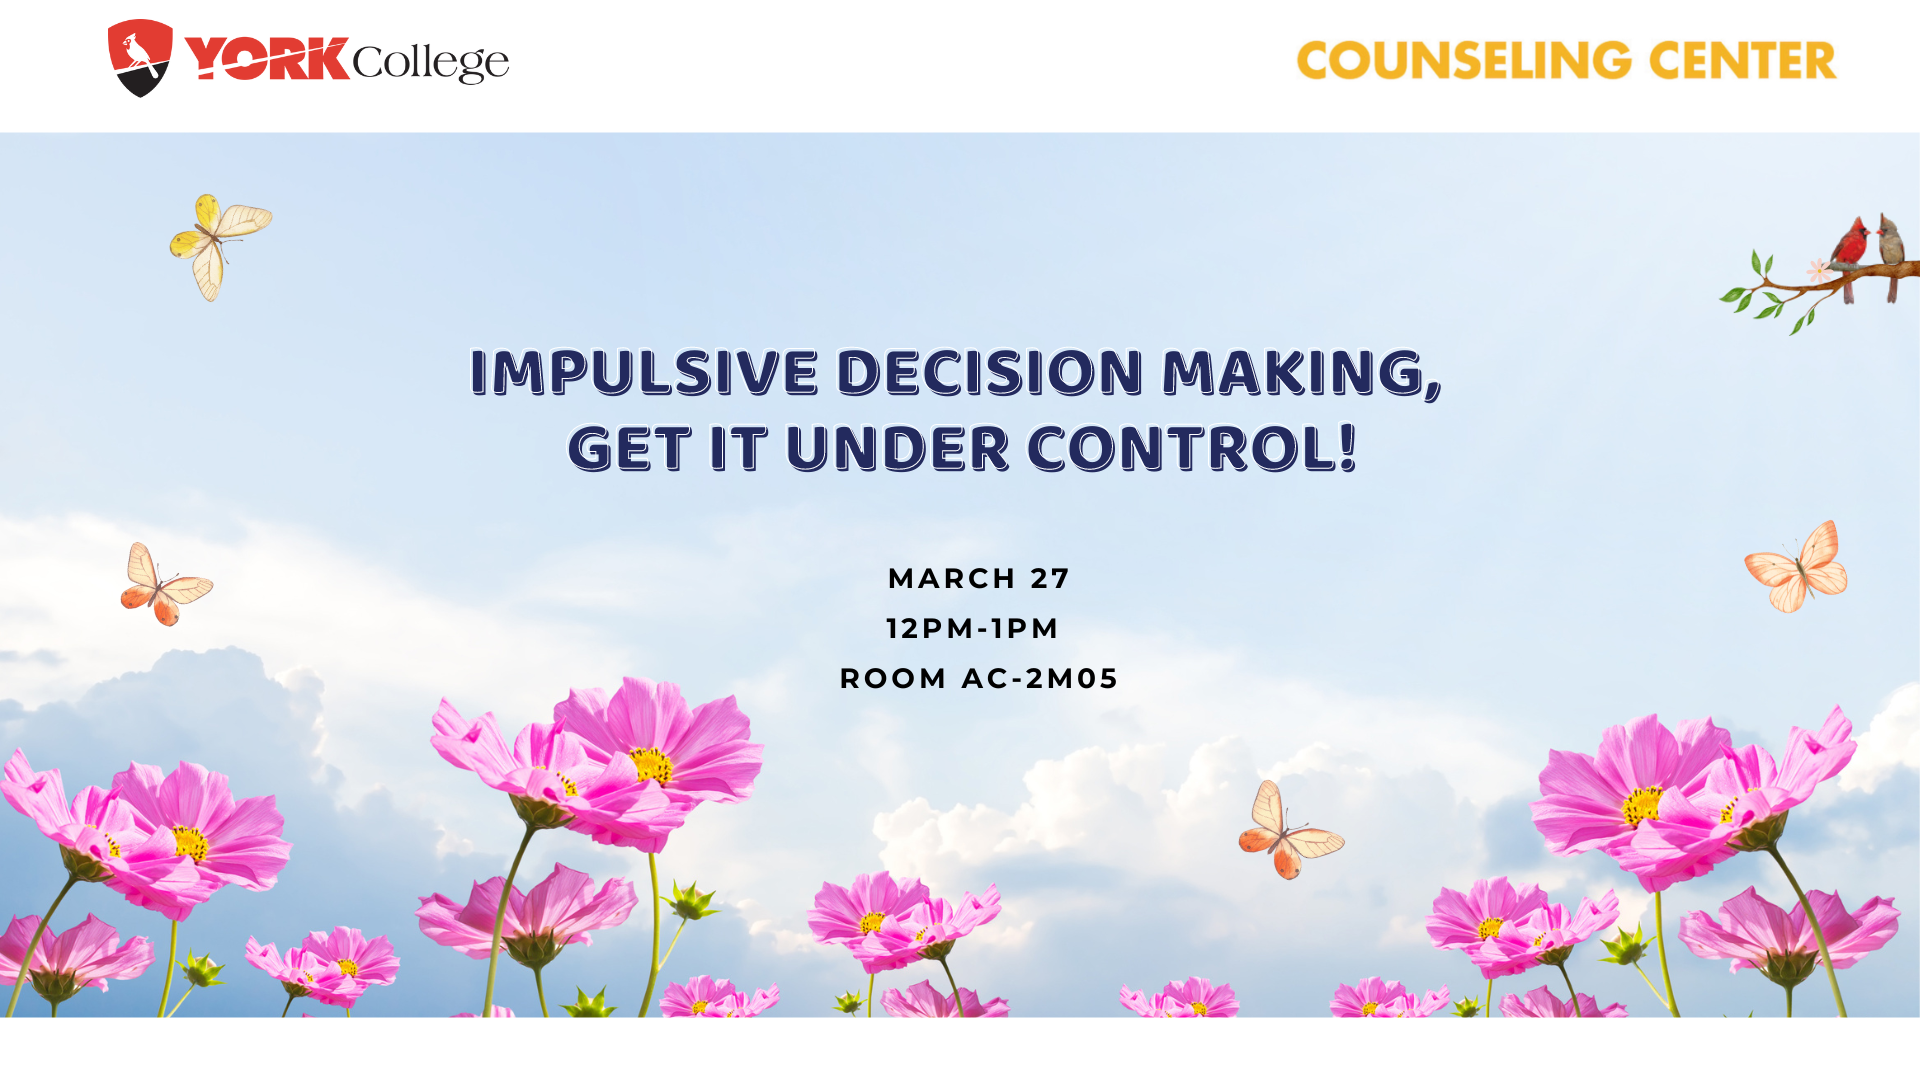 https://www.york.cuny.edu/events/impulsive-decision-making-get-it-under-control/@@images/preview_image-1920-6bb57918323695d3e12ddc6d781b7dfd.png